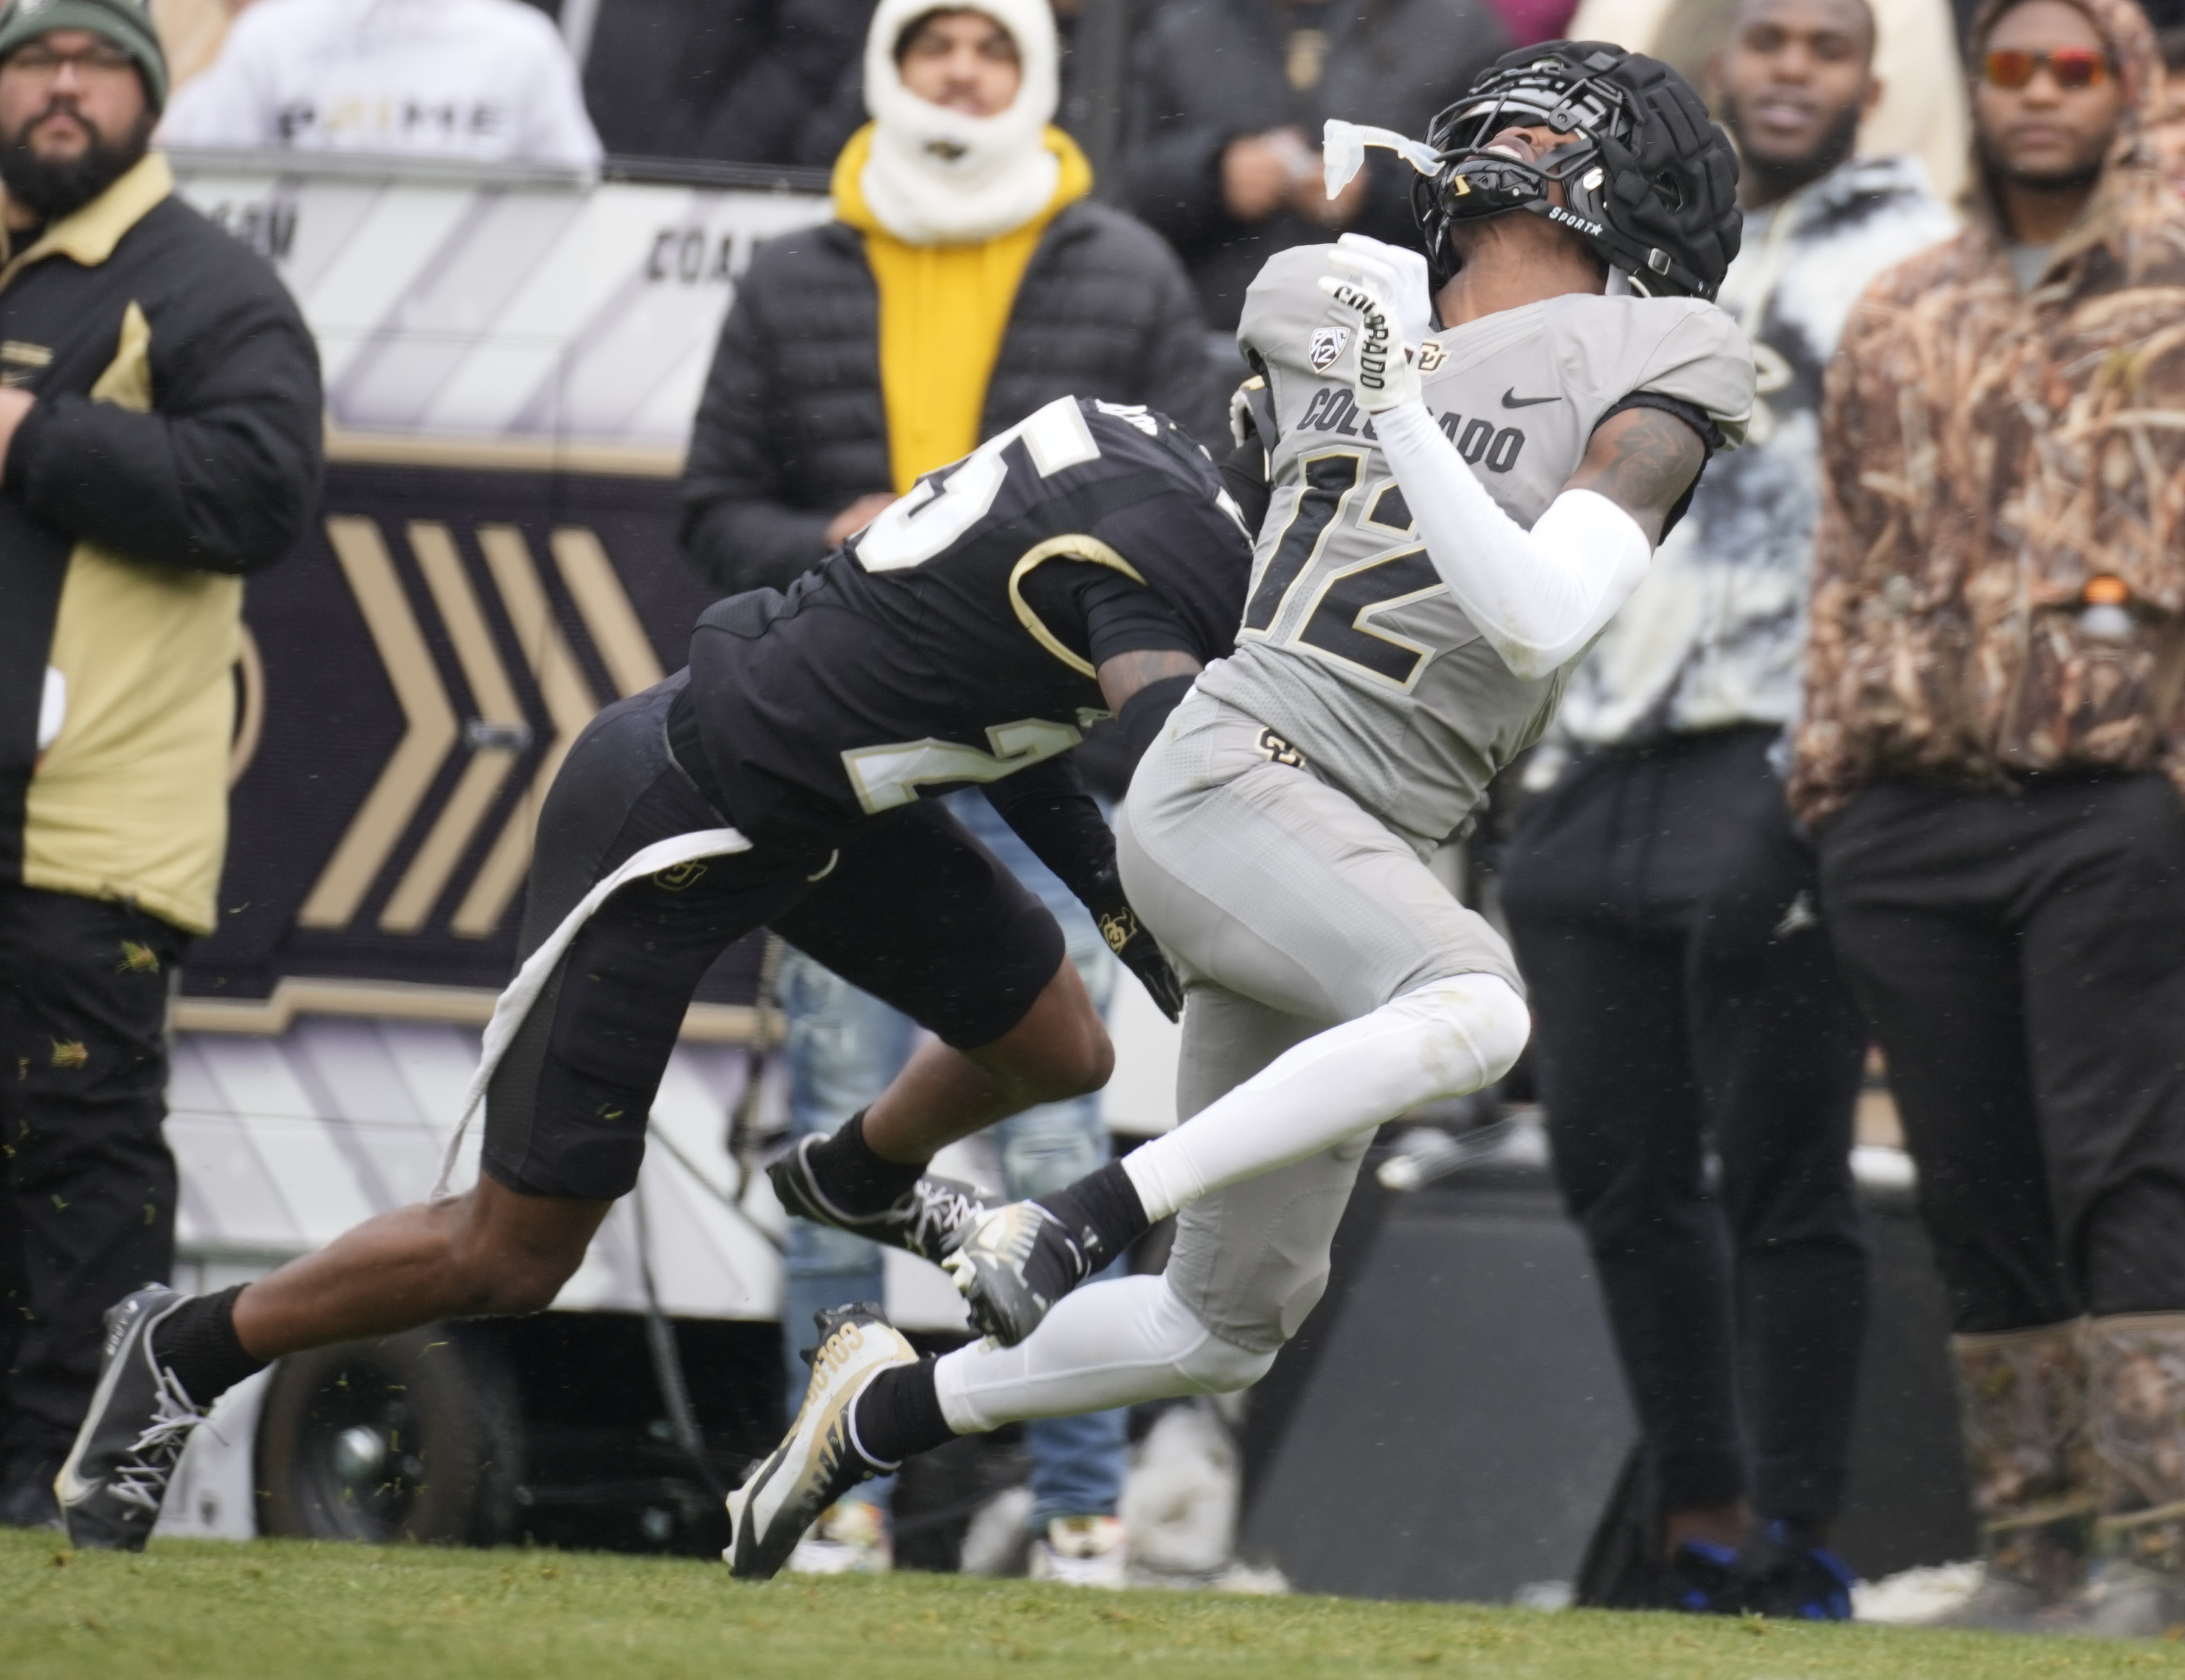 Coach Prime, CU Buffs stage quite the show in snowy spring game